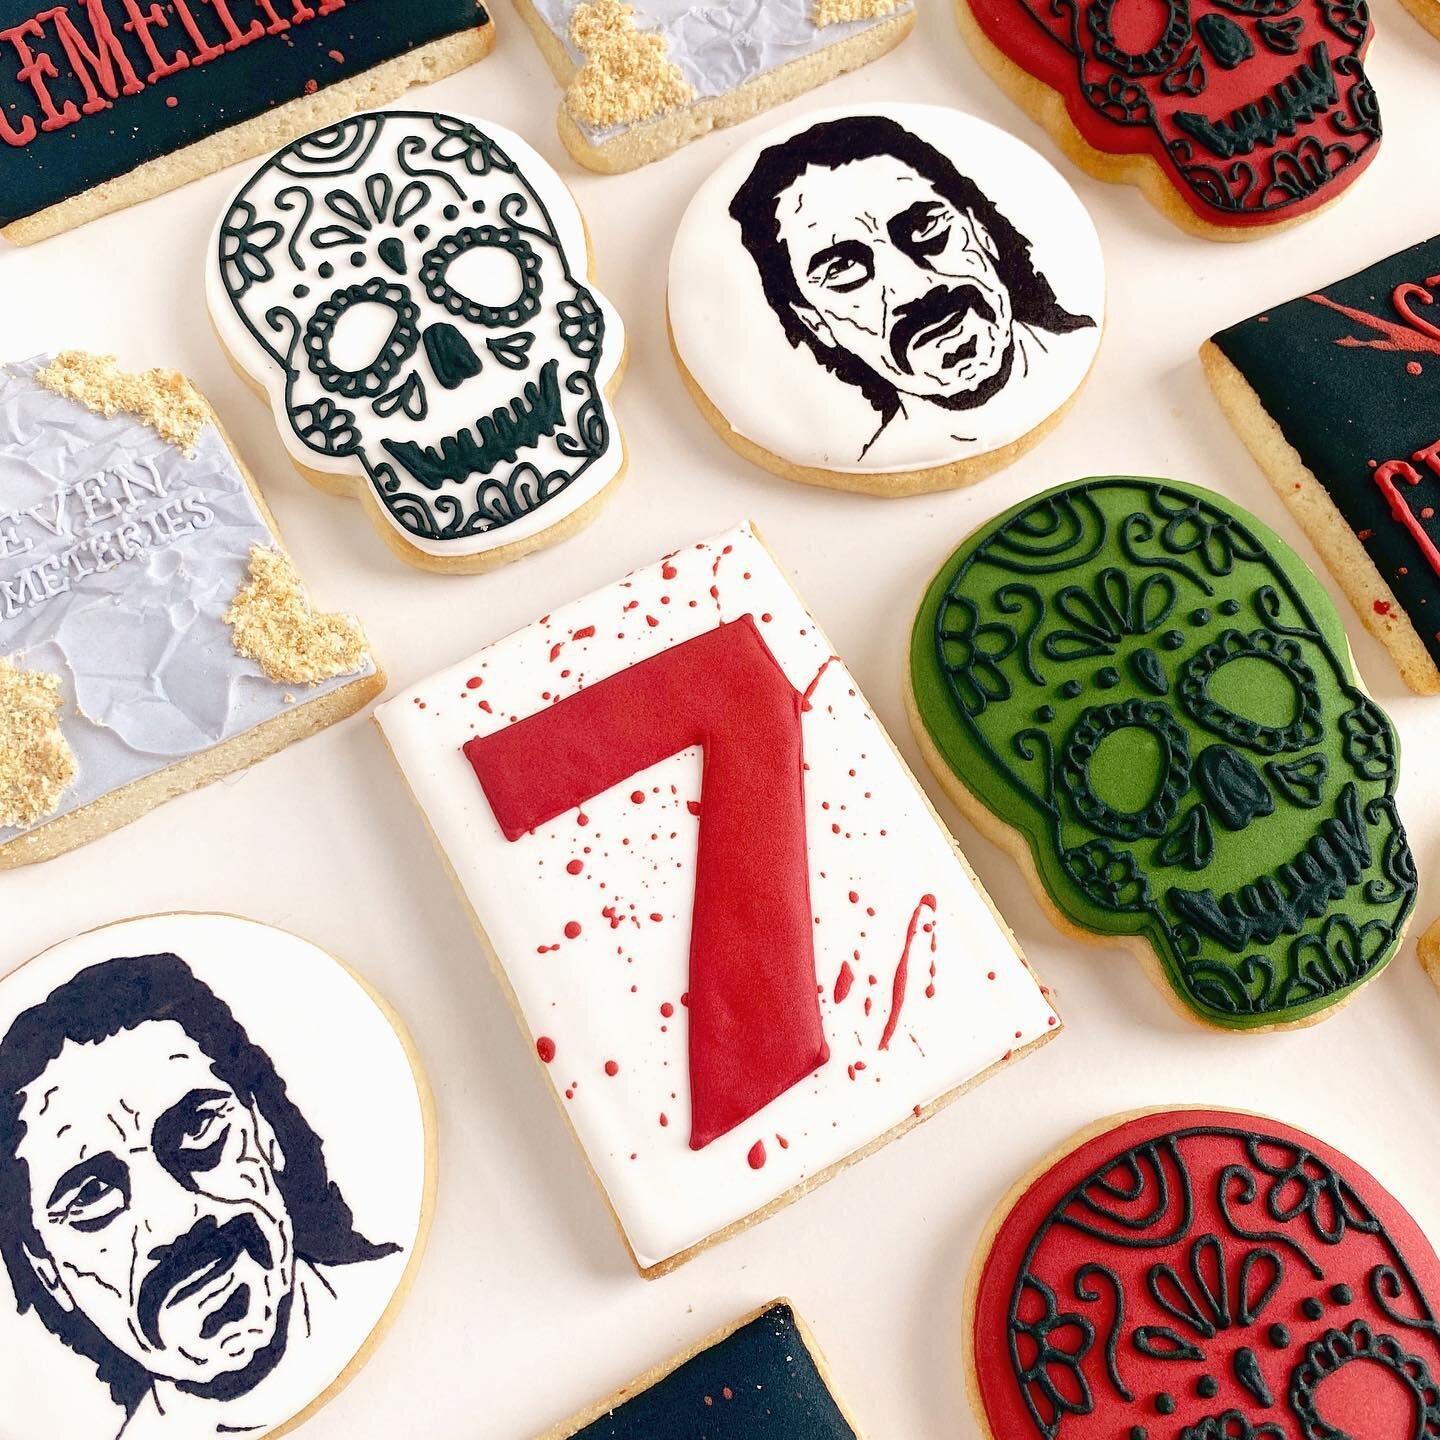 THAT&rsquo;S A WRAP &mdash; STOKED that I got to make these cookies to celebrate the end of filming for a new movie starring @officialdannytrejo ✨🎥